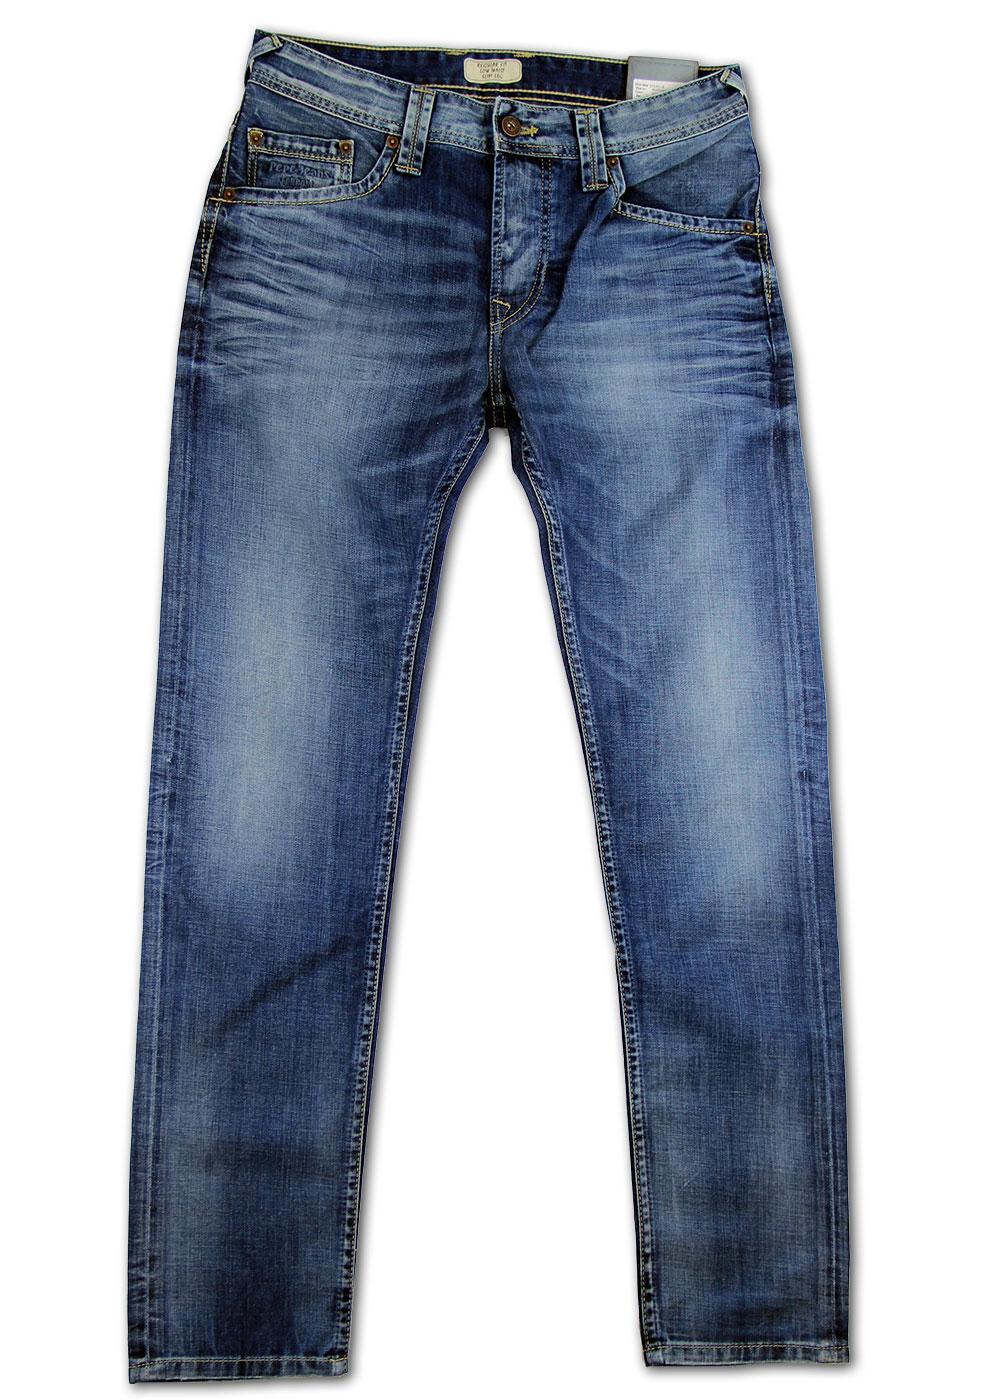 Colville PEPE JEANS Slim Tapered Fit Retro Jeans